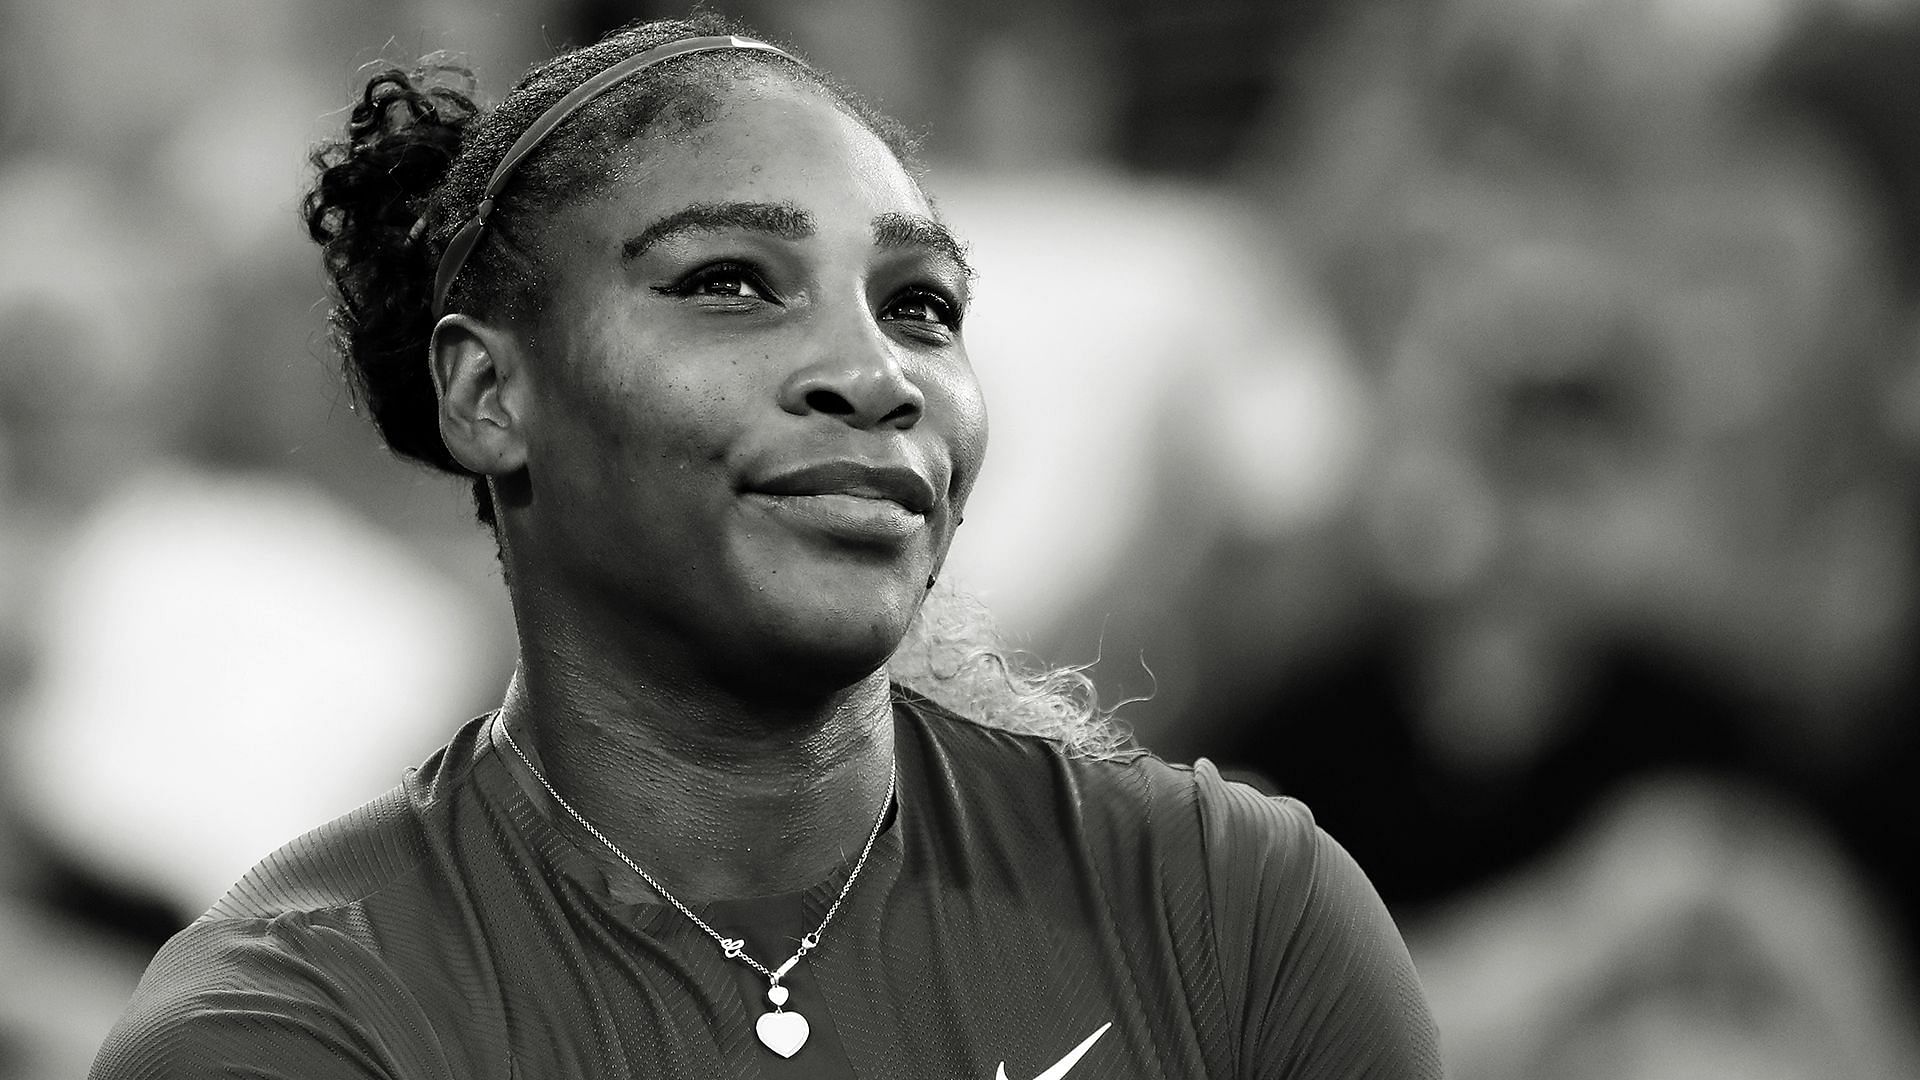 Serena Williams keeping the black community in front at the world stage.